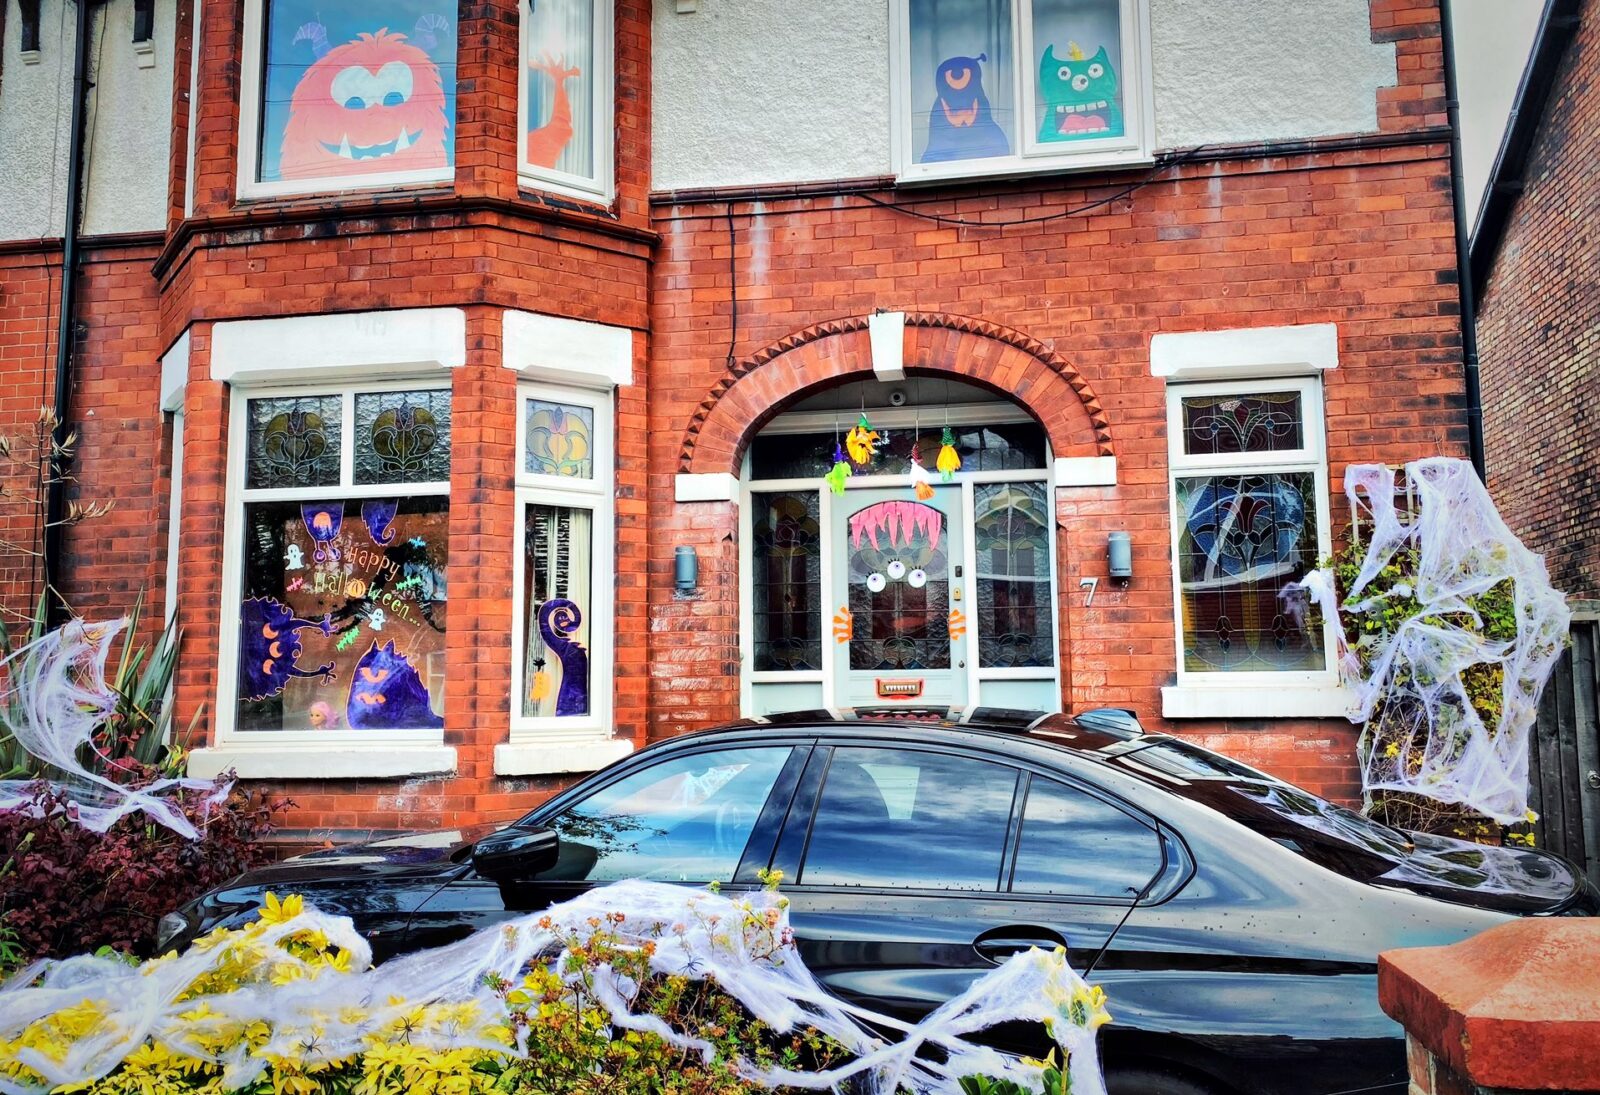 Over 160 houses are taking part in the &#8216;4 Heatons Halloween Town&#8217; trail in Stockport this weekend, The Manc